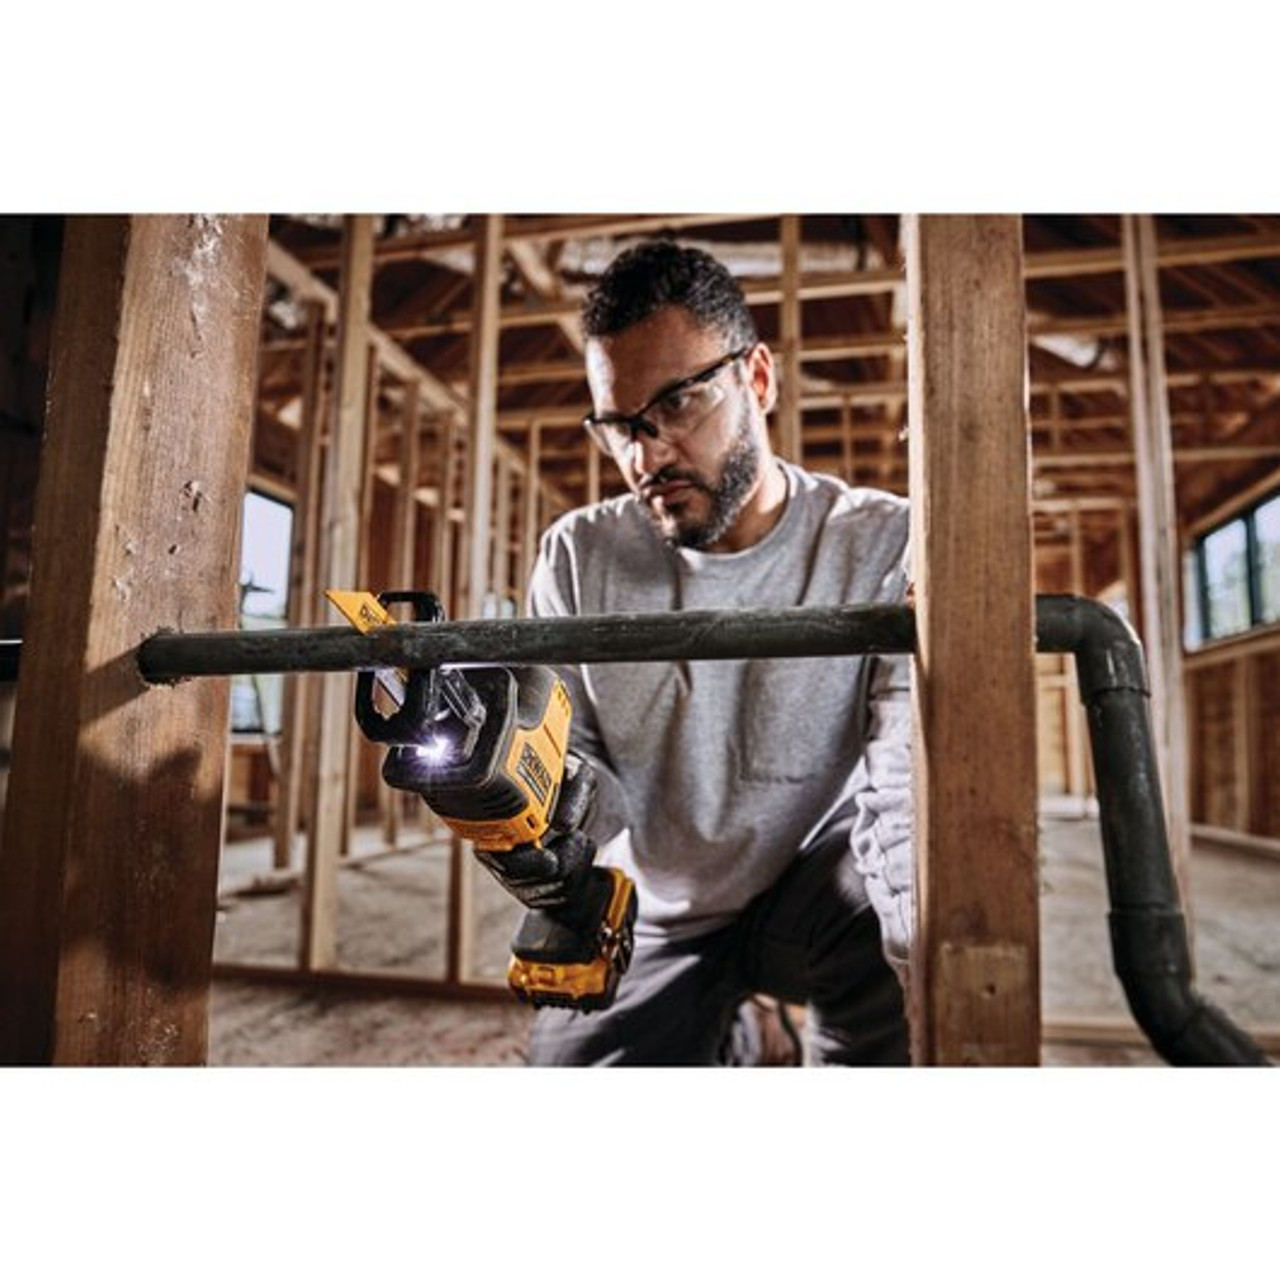 DeWALT ATOMICâ„¢ 20V MAX* Cordless One-Handed Reciprocating Saw (Tool Only)  DCS369B